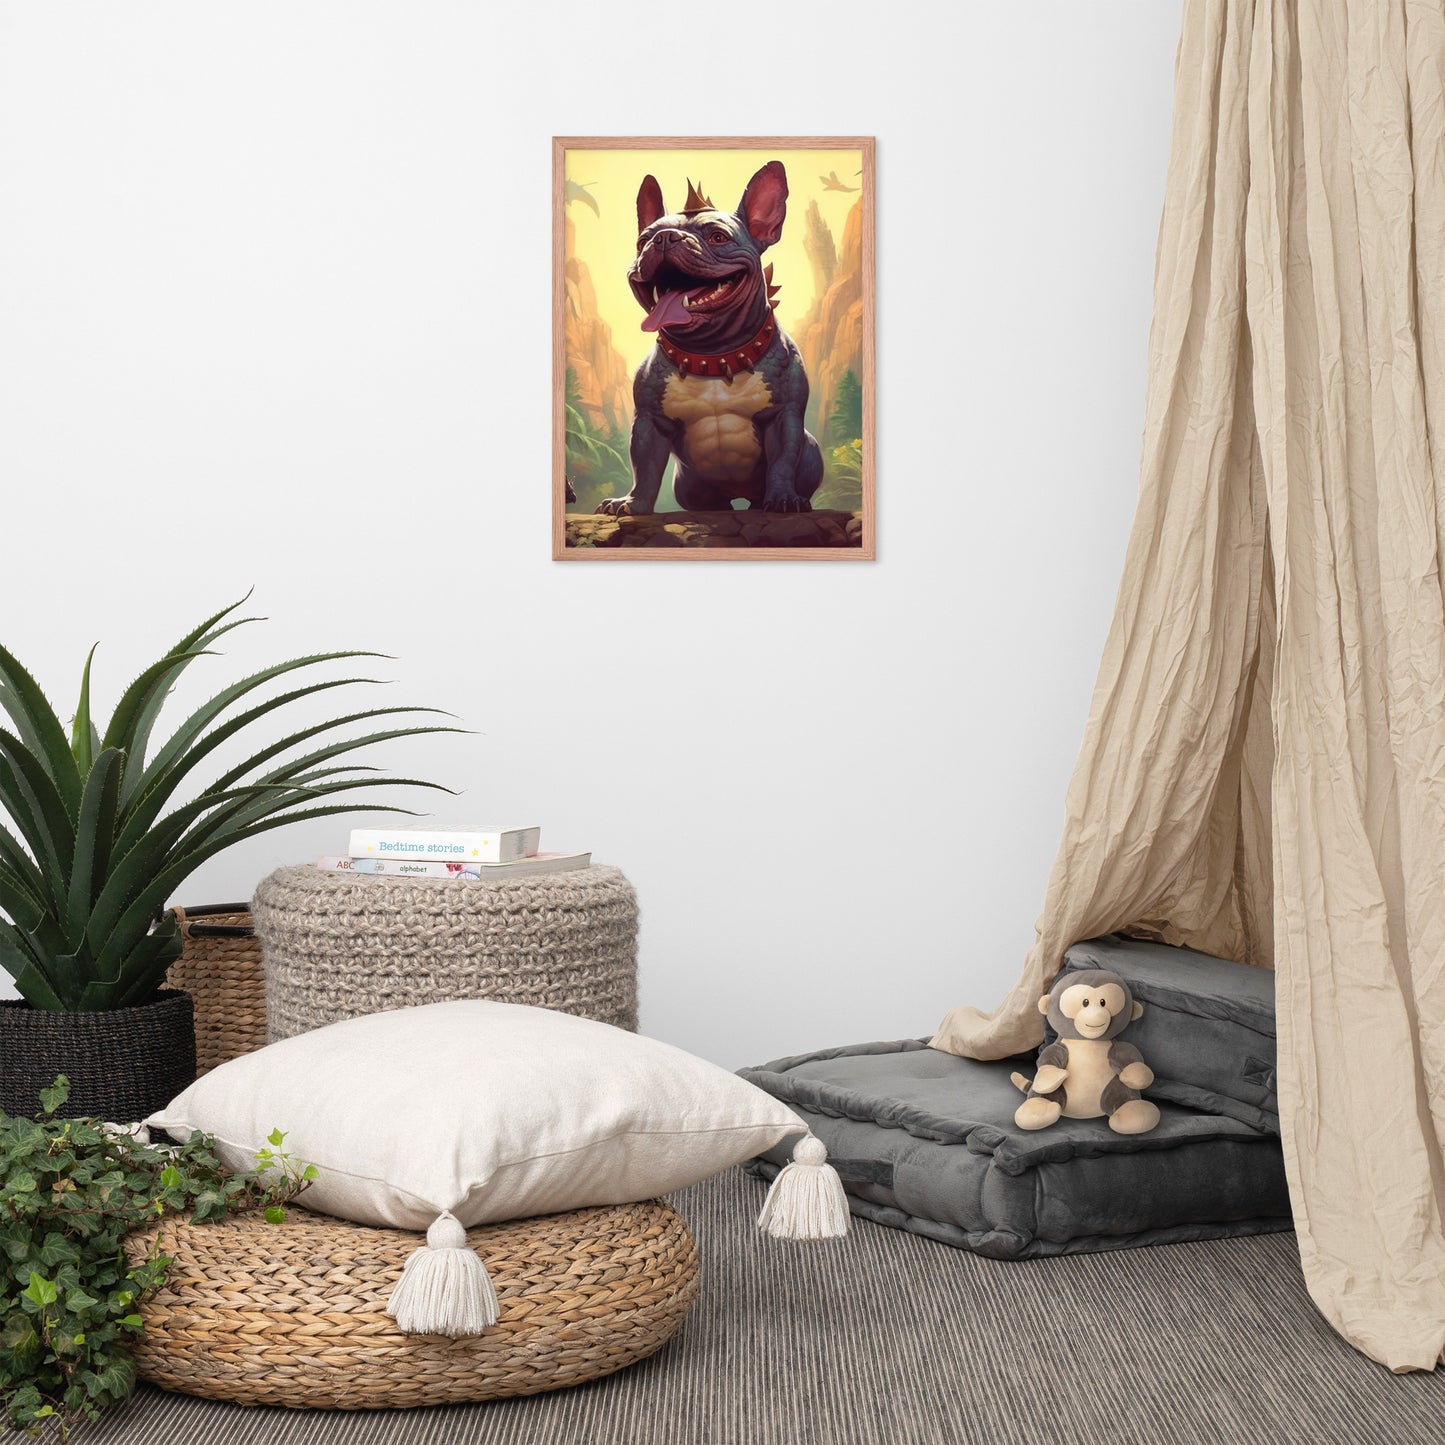 Dinosaur Frenchie Framed Poster - A Roaringly Cute and Artistic Choice for Pet Lovers and Dinosaur Enthusiasts